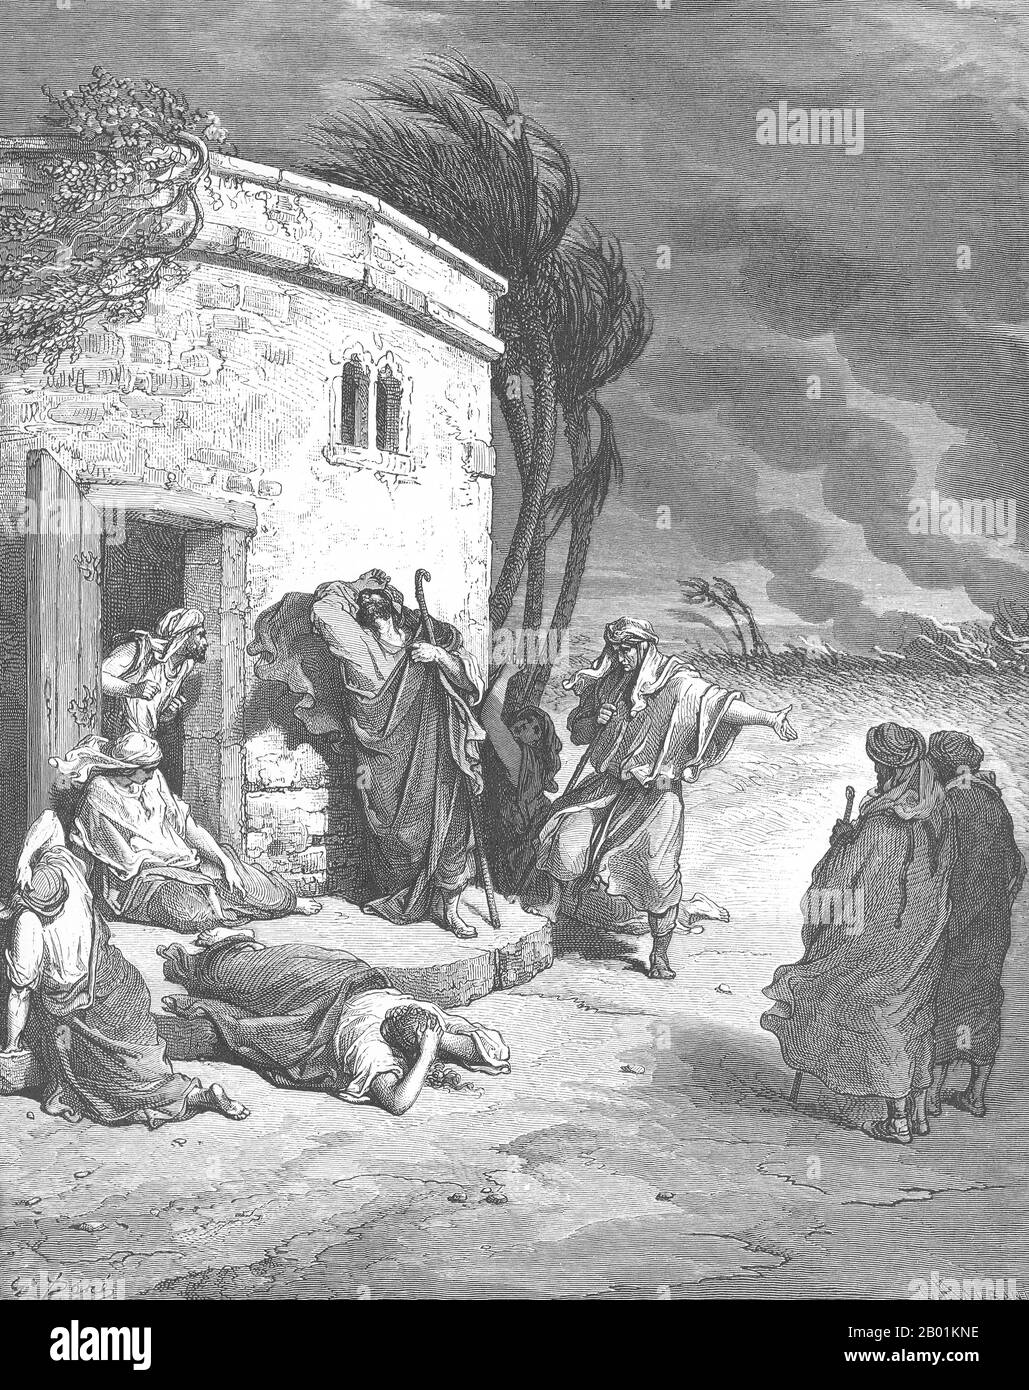 France: 'Job Hears of His Misfortunes (Book of Job 1:1-22)'. Lithograph by Gustave Doré (6 January 1832 - 23 January 1883), 1866.  Job is the central character of the Book of Job in the Hebrew Bible. Job is also recognised as a prophet of God in the Qur'an.  The Book of Job begins with an introduction to Job's character. He is described as a blessed man who lives righteously. God's praise of Job prompts Satan to challenge Job's integrity and suggesting that Job serves God simply because he protects him. God removes Job's protection, allowing Satan to take his wealth, his children and more. Stock Photo